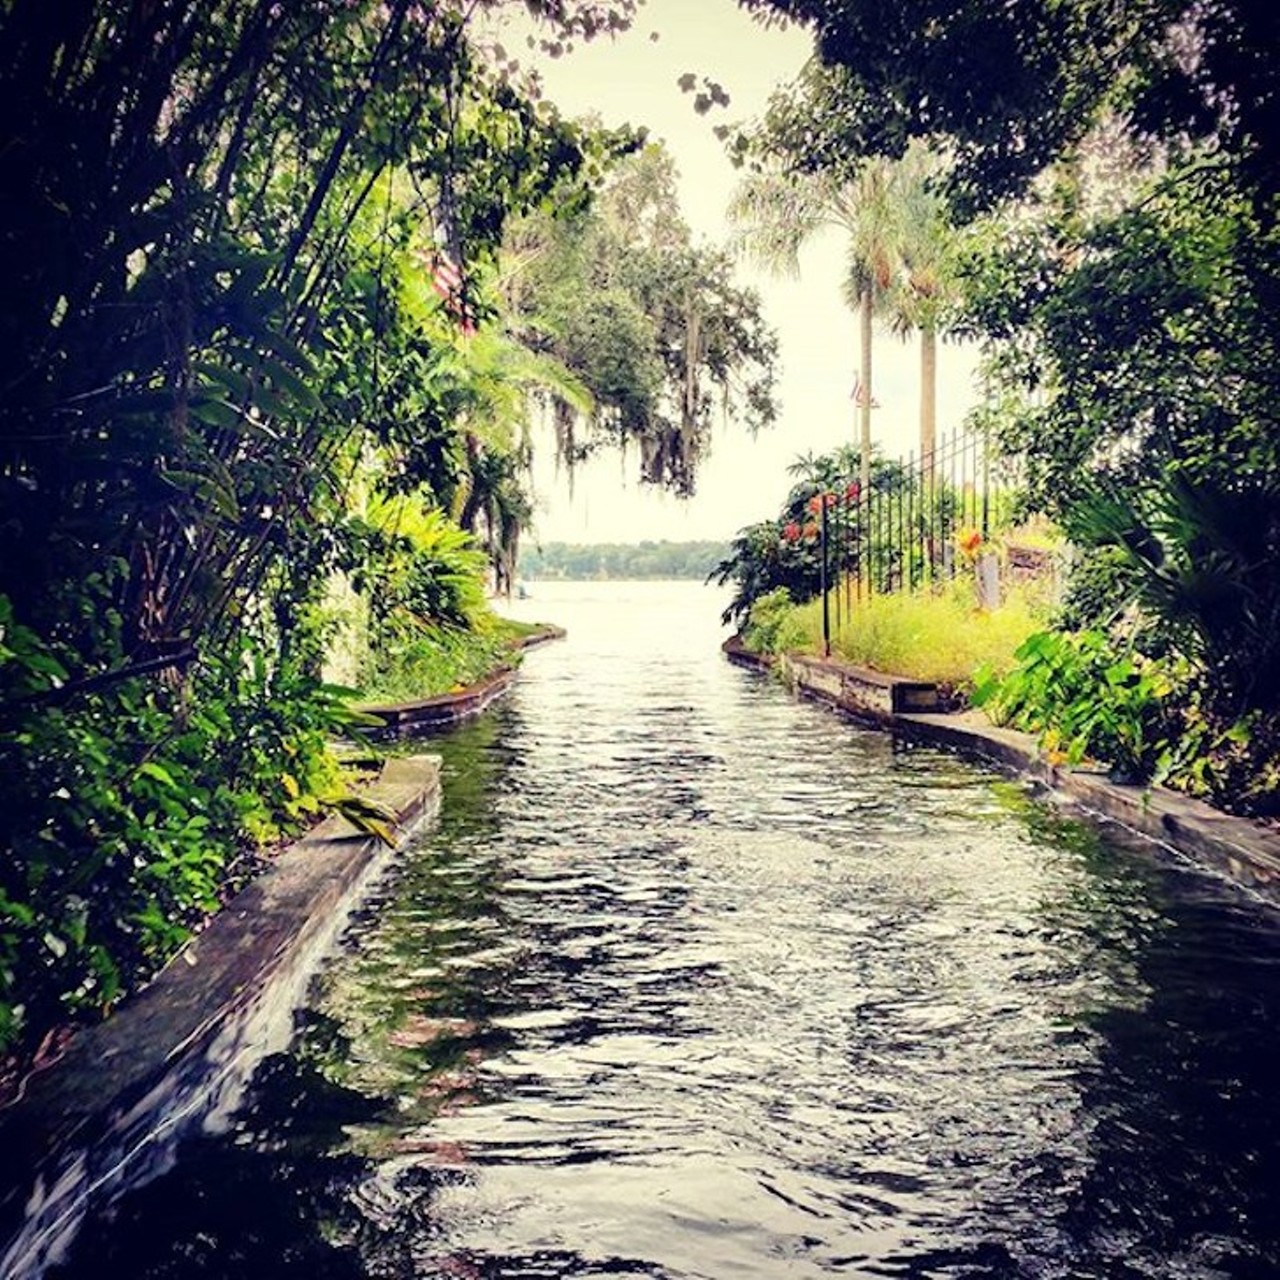 22 beautiful places in the Orlando area you probably haven't visited, Orlando